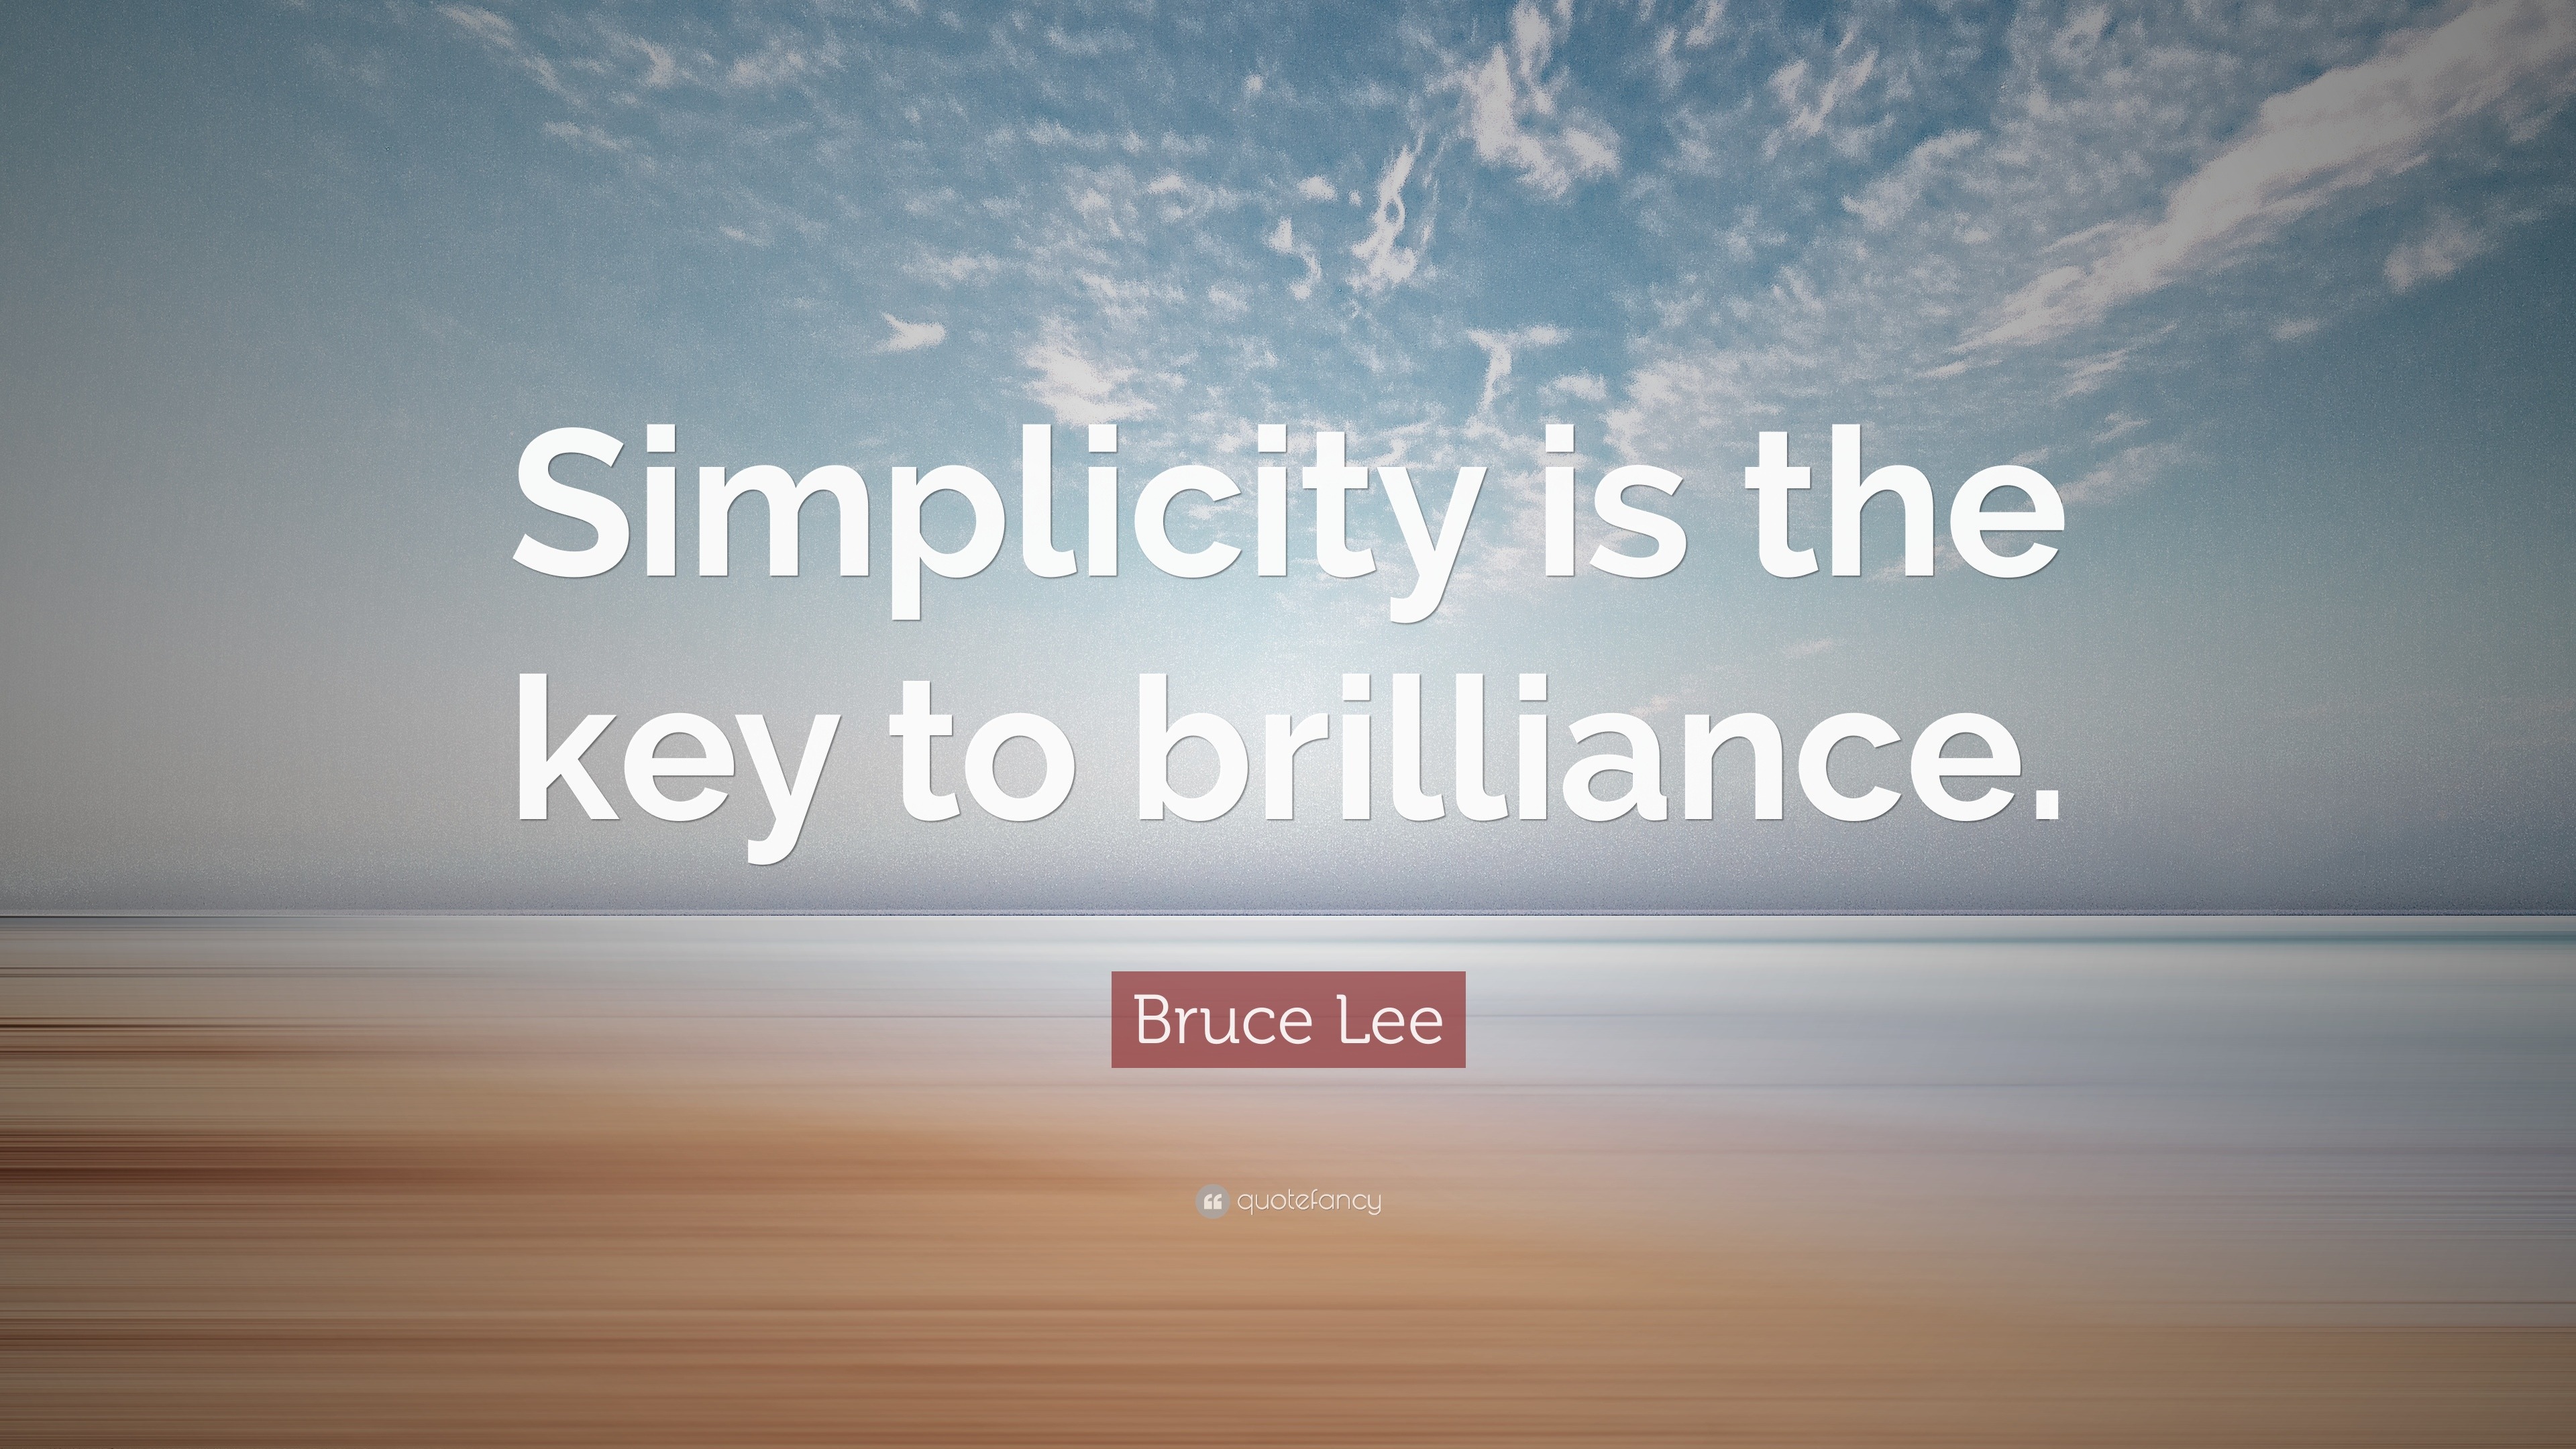 20 Inspirational Quotes on Simplicity